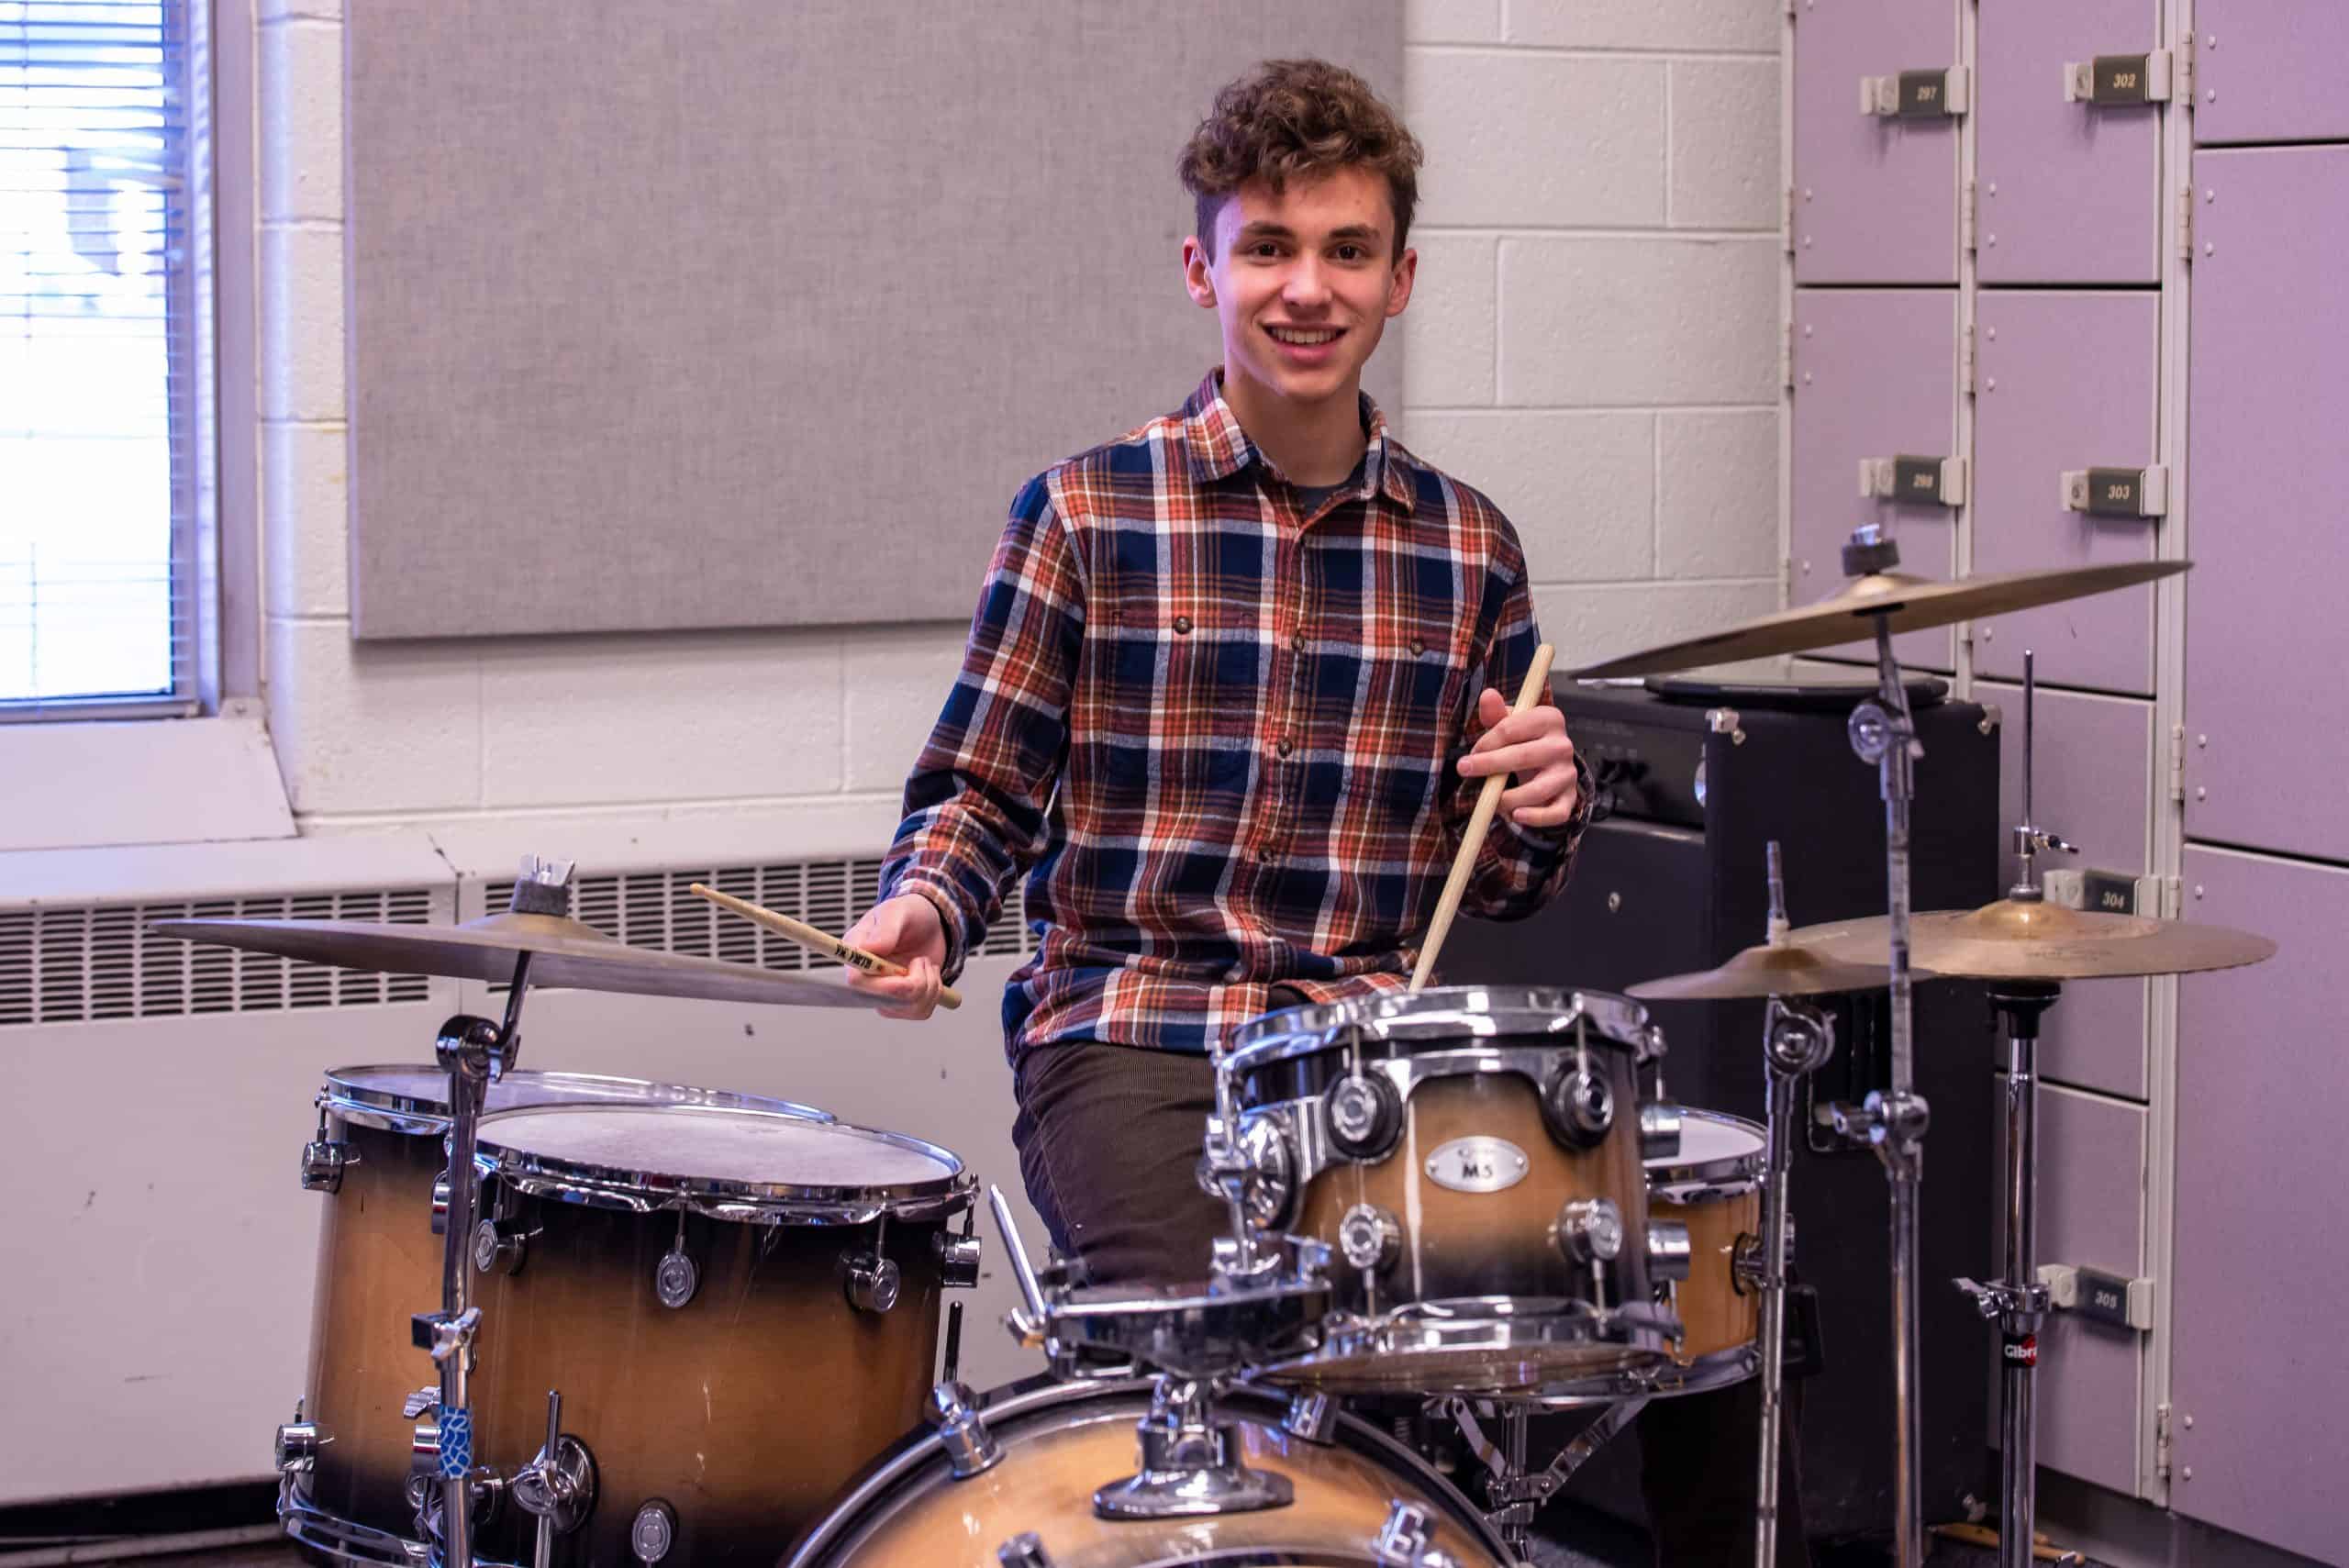 High school male, Simon Von Hatten, sitting at drumset holding drumsticks in each hand and smiling at the camera.